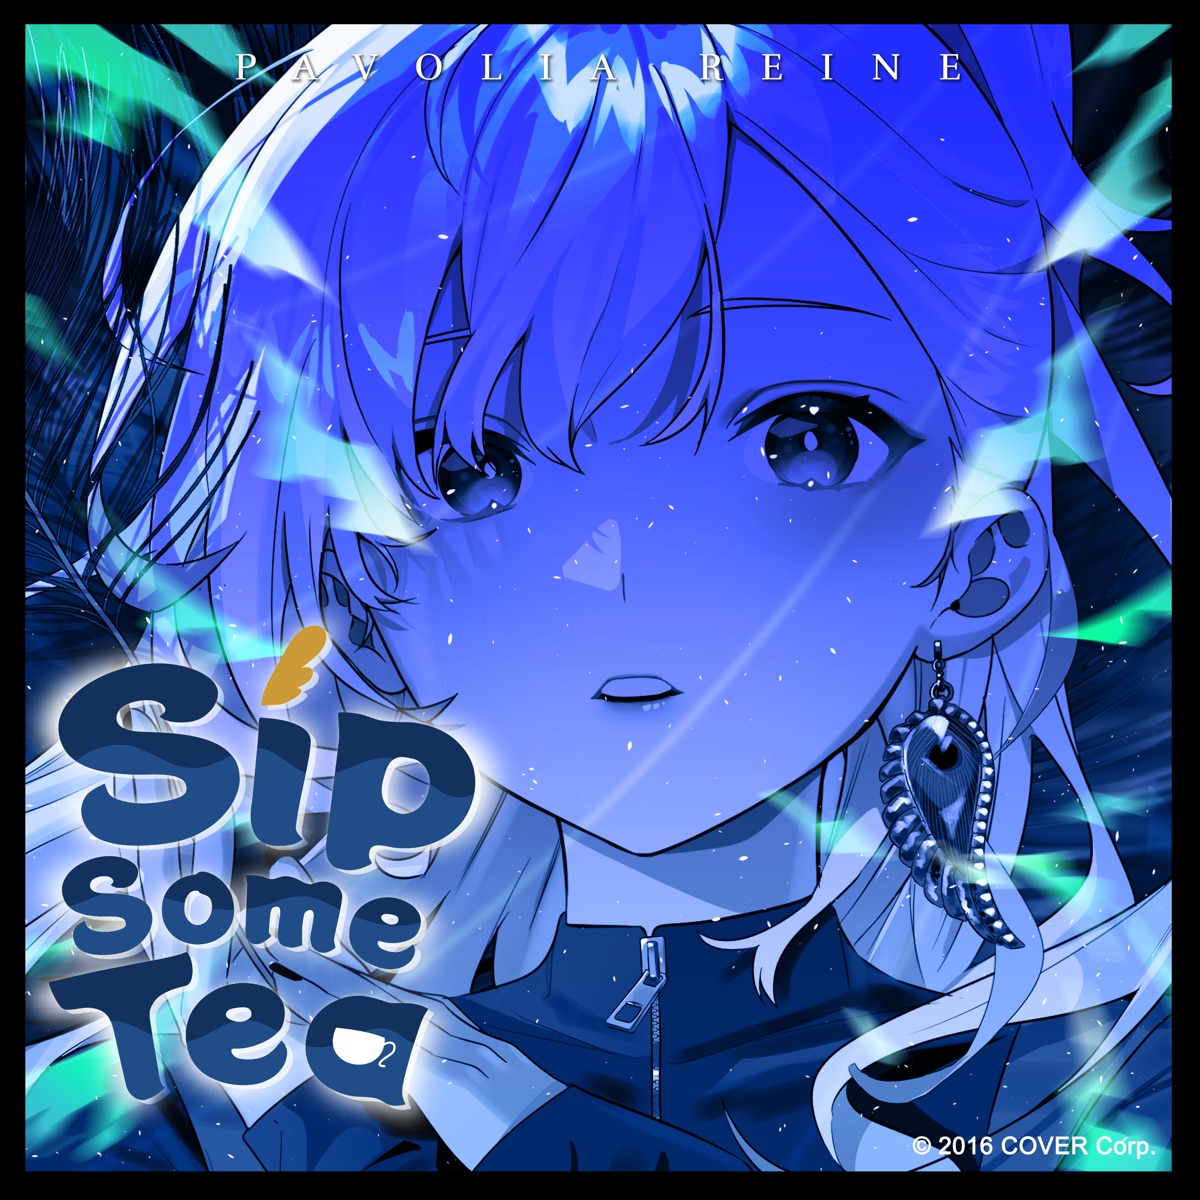 Cover art for『Pavolia Reine - Sip Some Tea』from the release『Sip Some Tea』